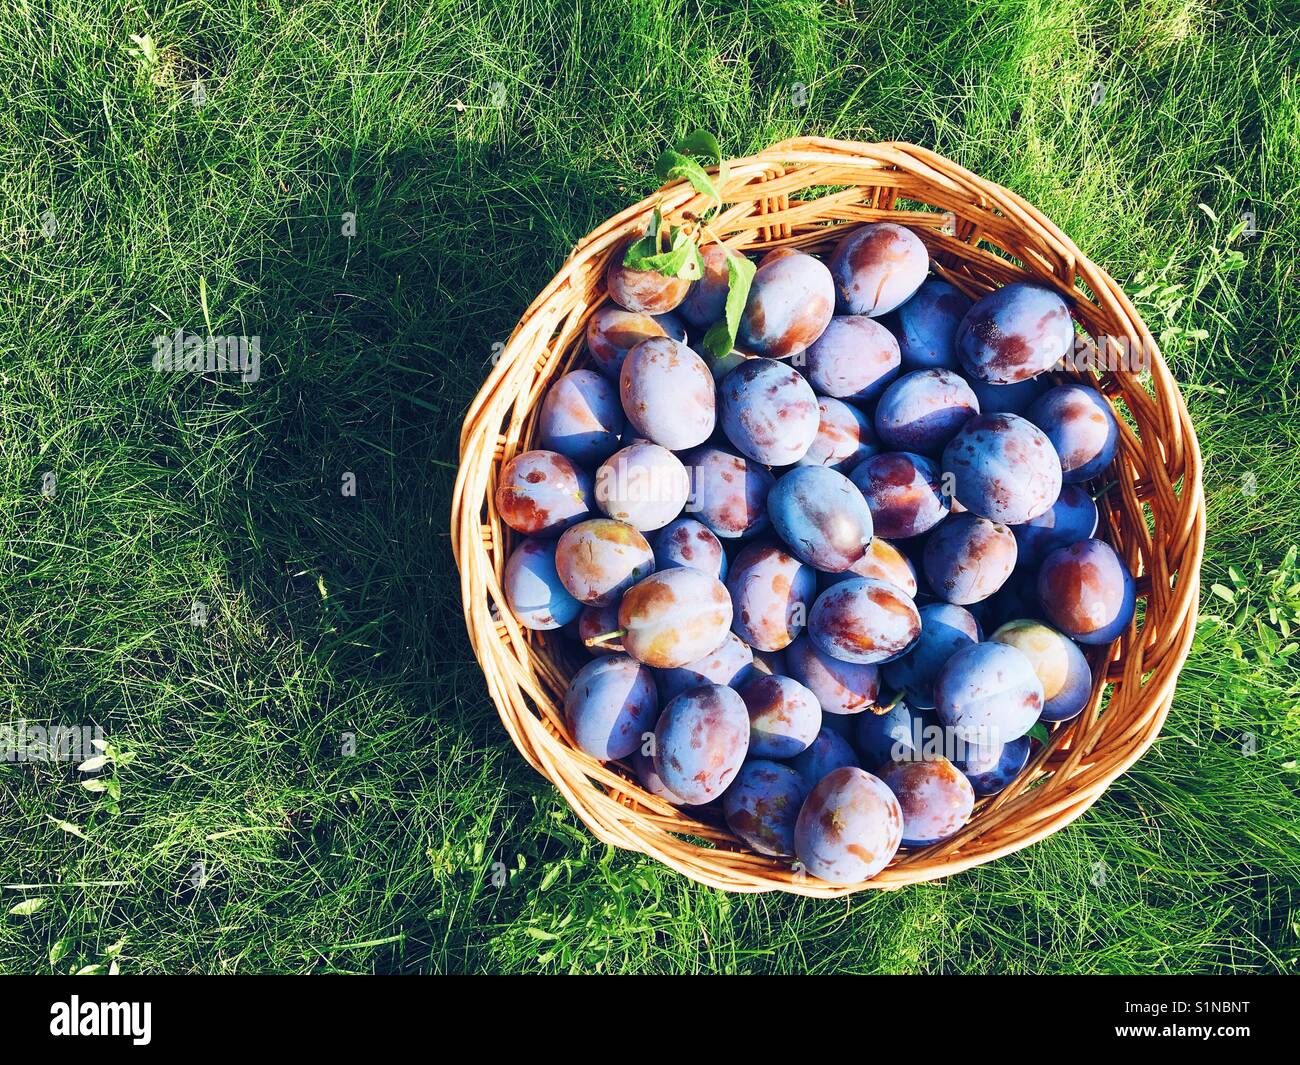 Basket full of plums on green grass outdoors. Space for copy. Stock Photo